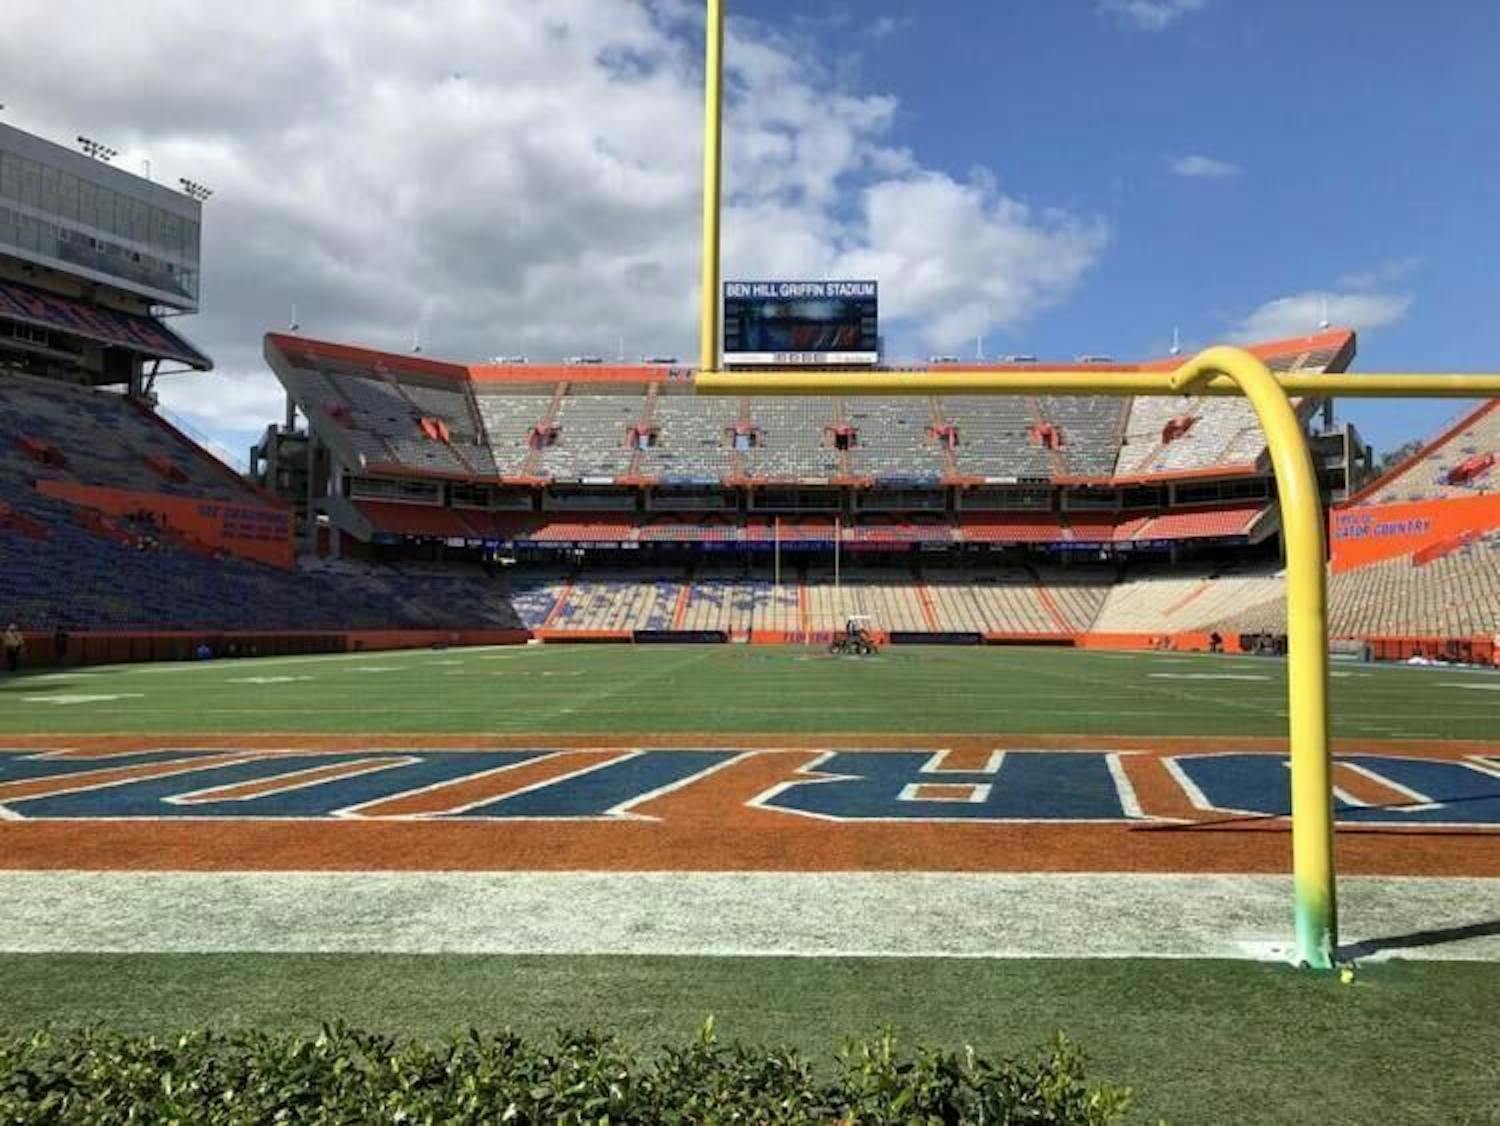 The University Police Department will not be in charge of social distancing when Florida plays South Carolina in its first home game at Ben Hill Griffin Stadium. Fans can use the Florida Gators app to report a social distancing violation in the stadium.